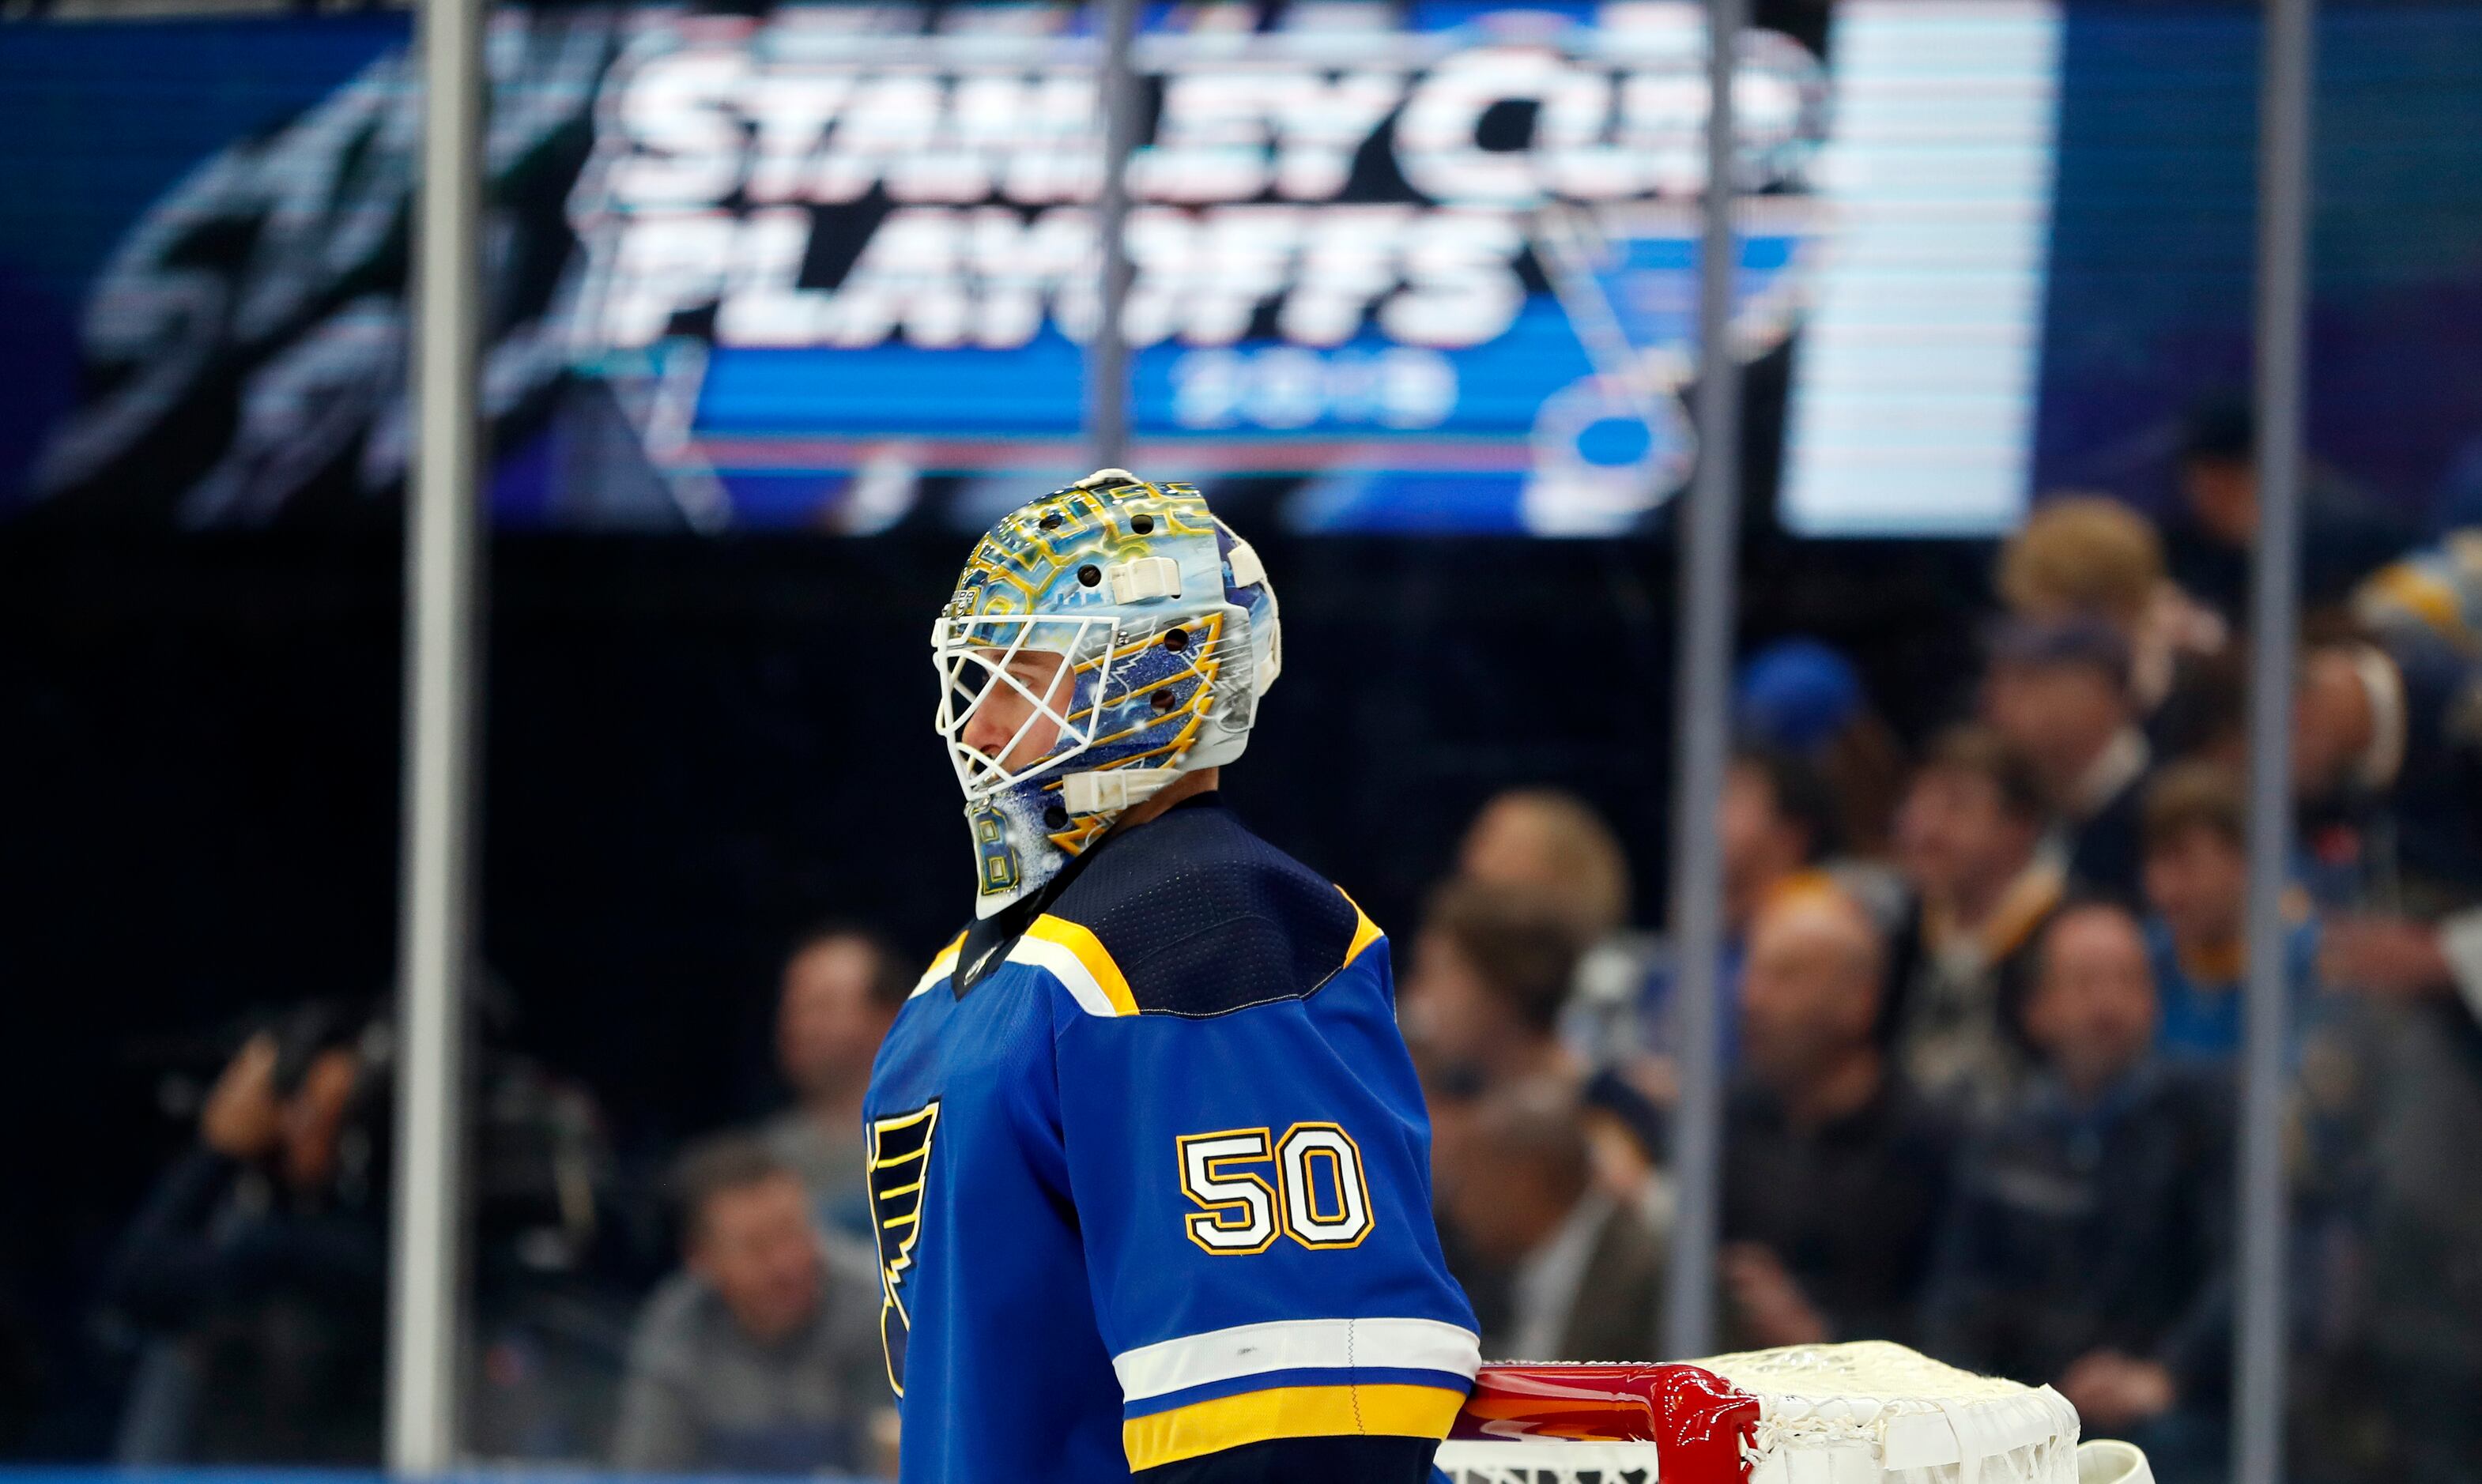 Jordan Binnington out for rest of second round